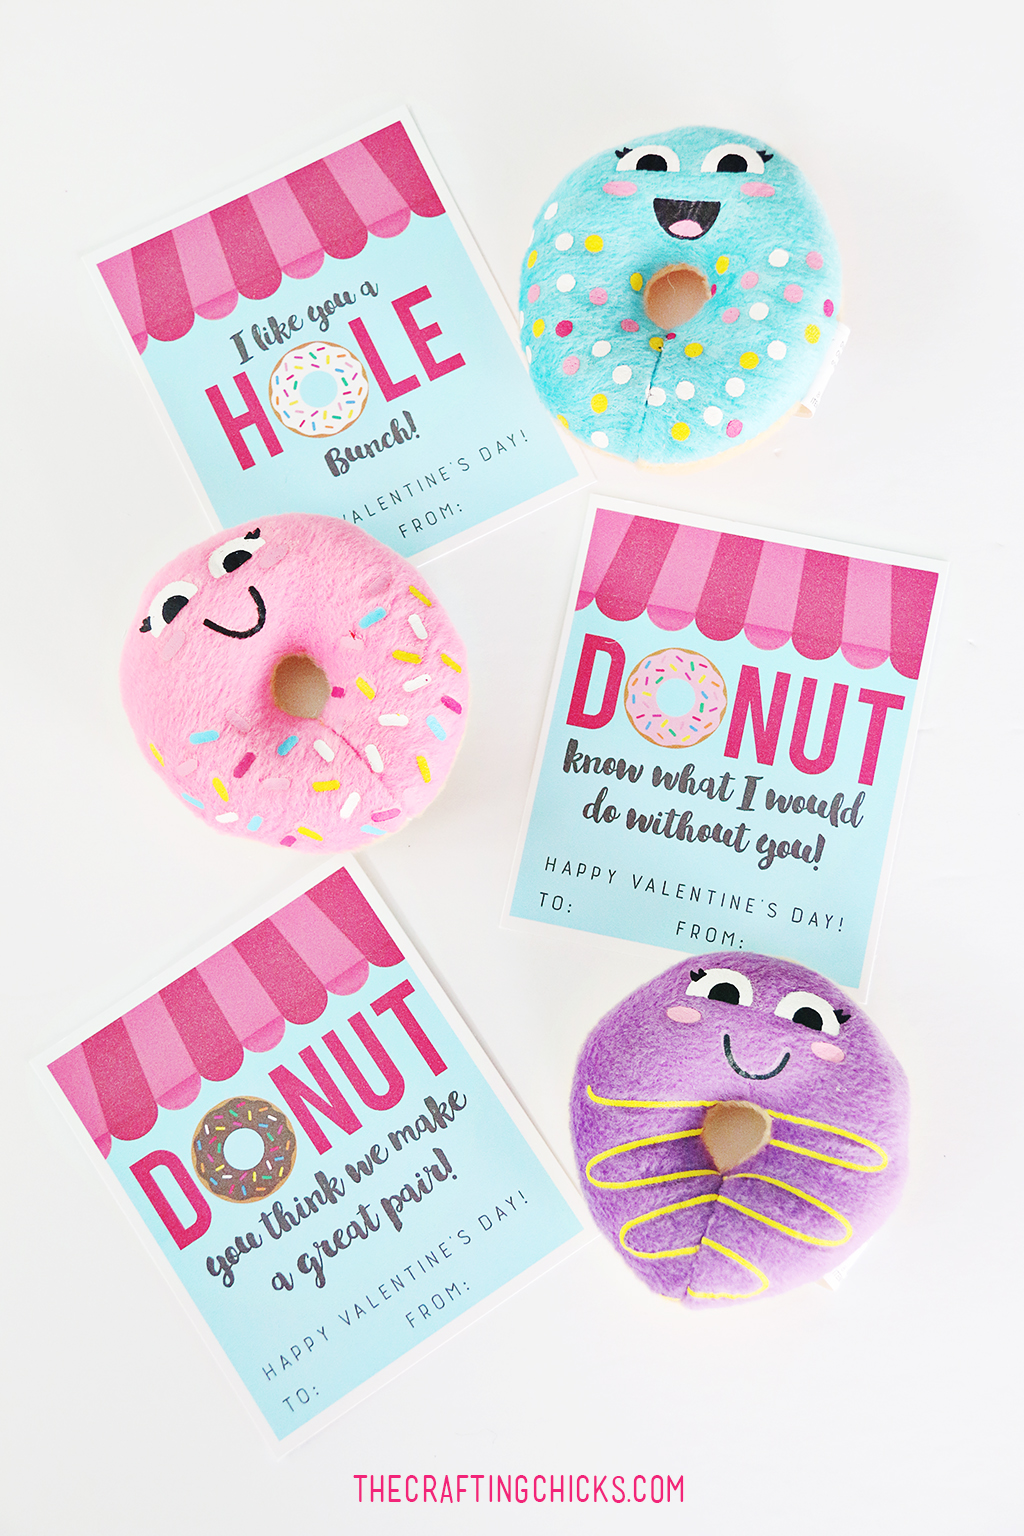 Donut Valentine Printables - A fun class valentine or try adding these tags to a box of donuts for teachers, neighbors or friends!